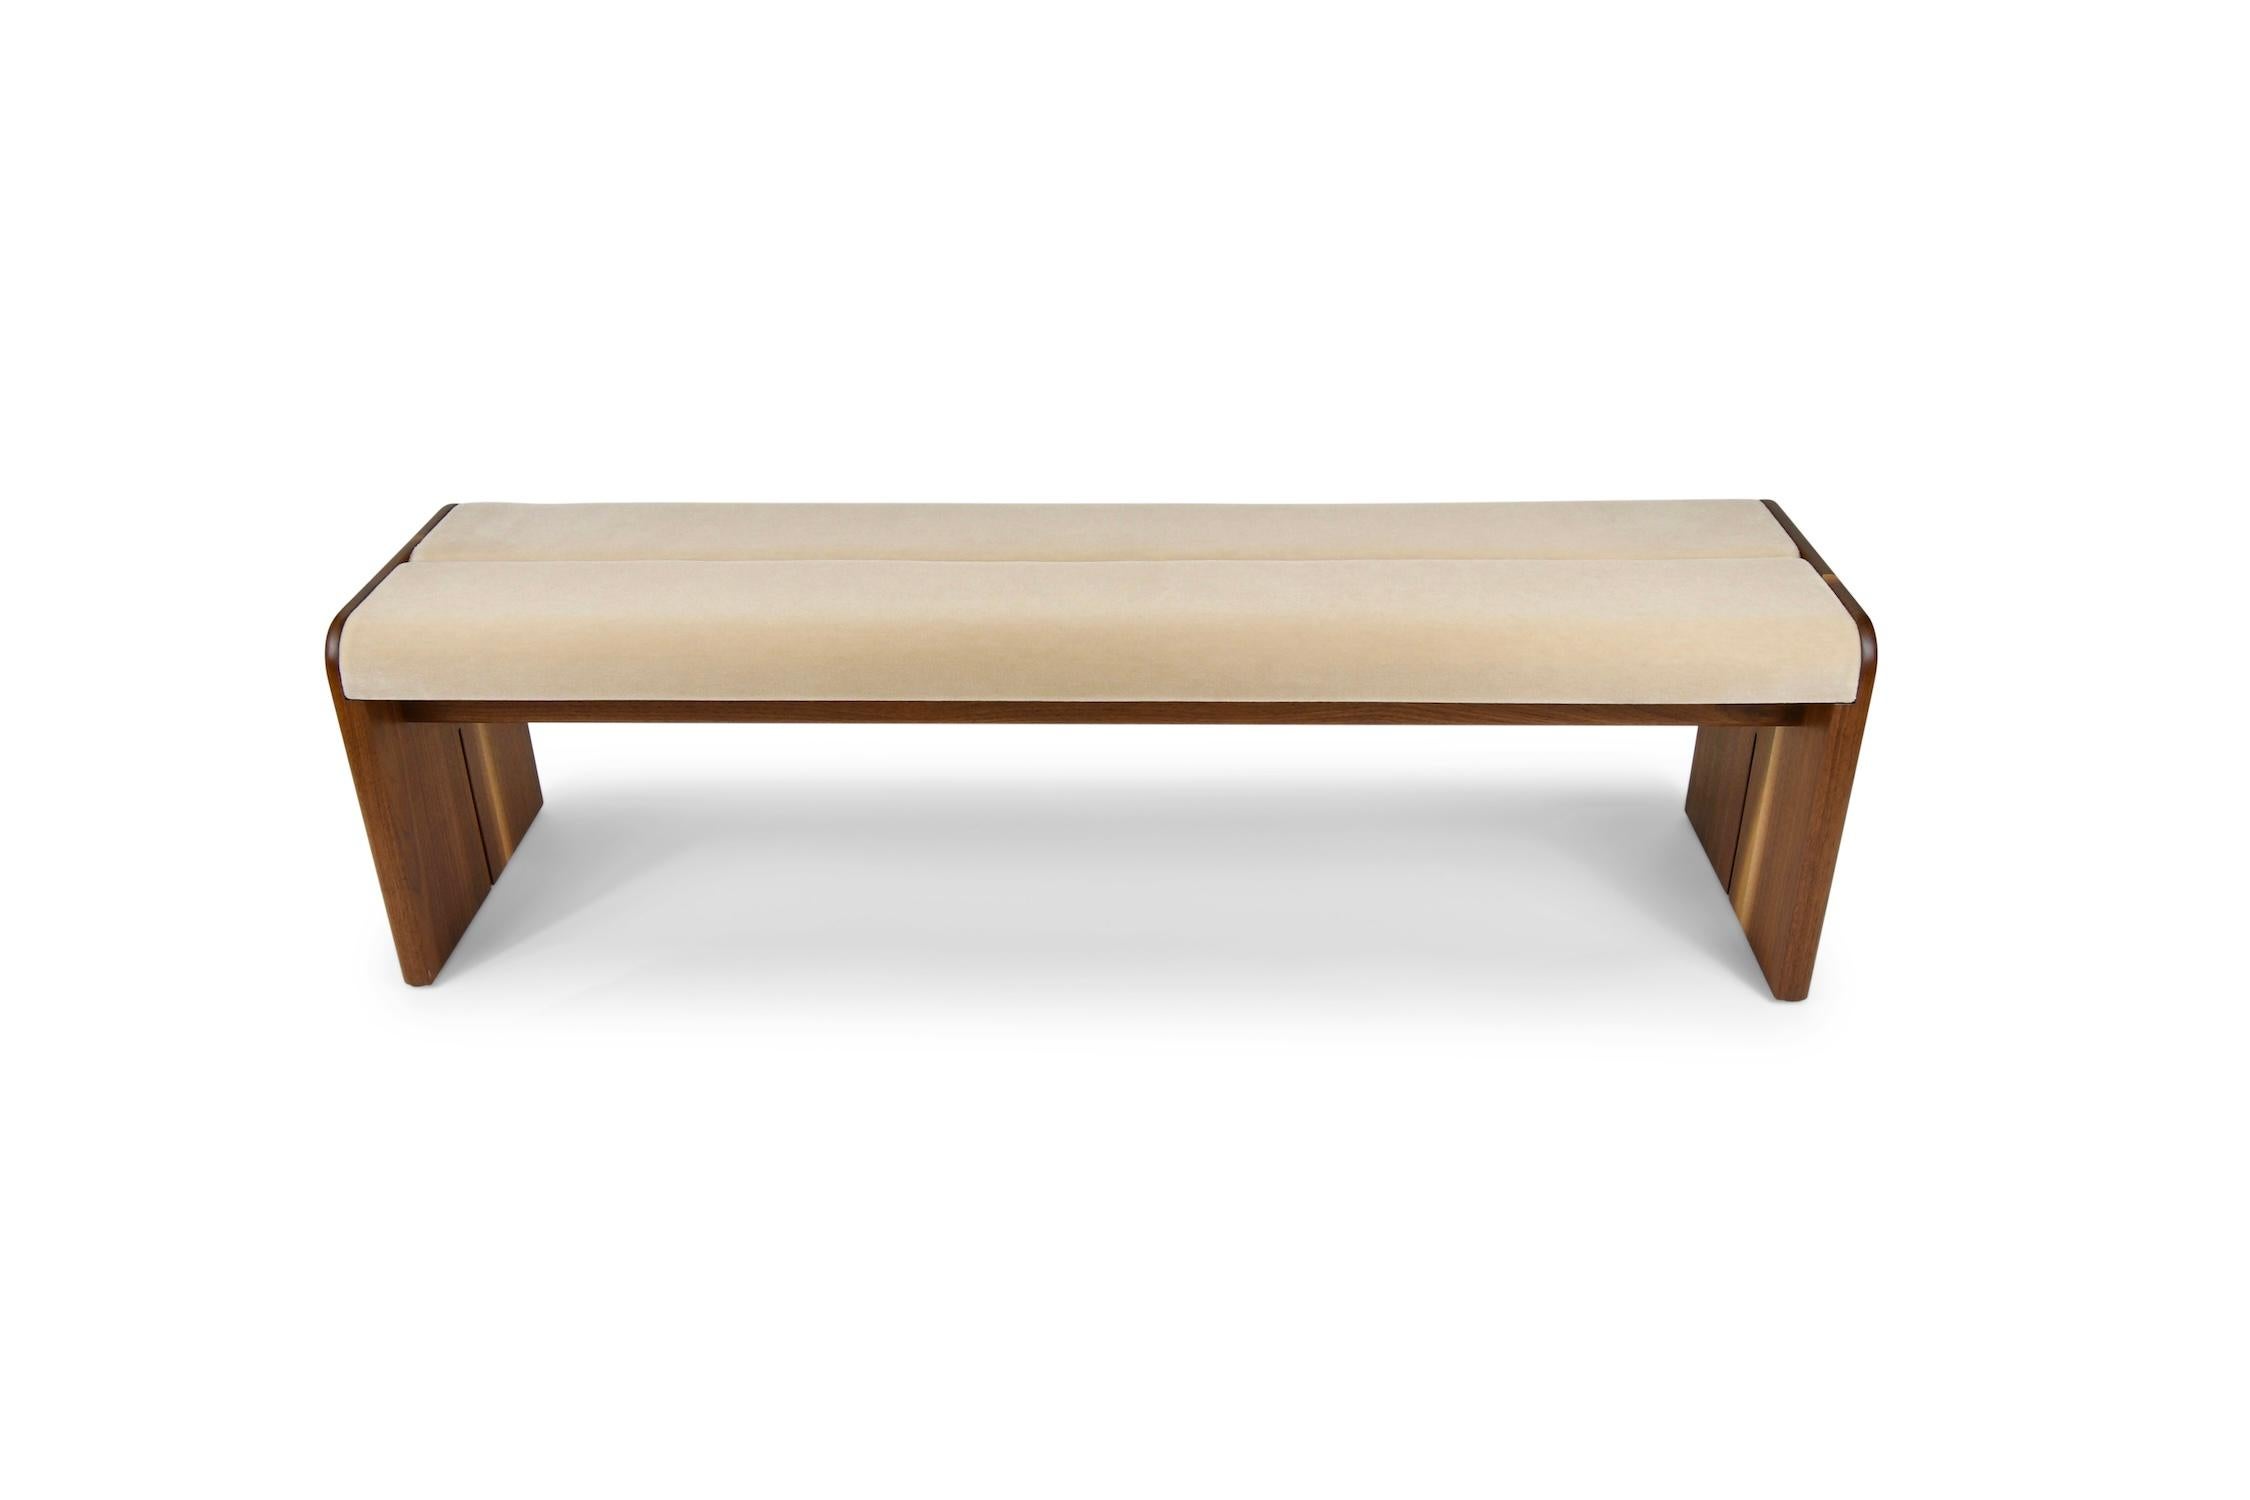 This Iris Bench is beautifully constructed with a silhouette that is simple, timeless, and sleek. Topped with a cushion to provide additional texture and softness to the piece. 

Standard Lengths (starting at pricing):
84